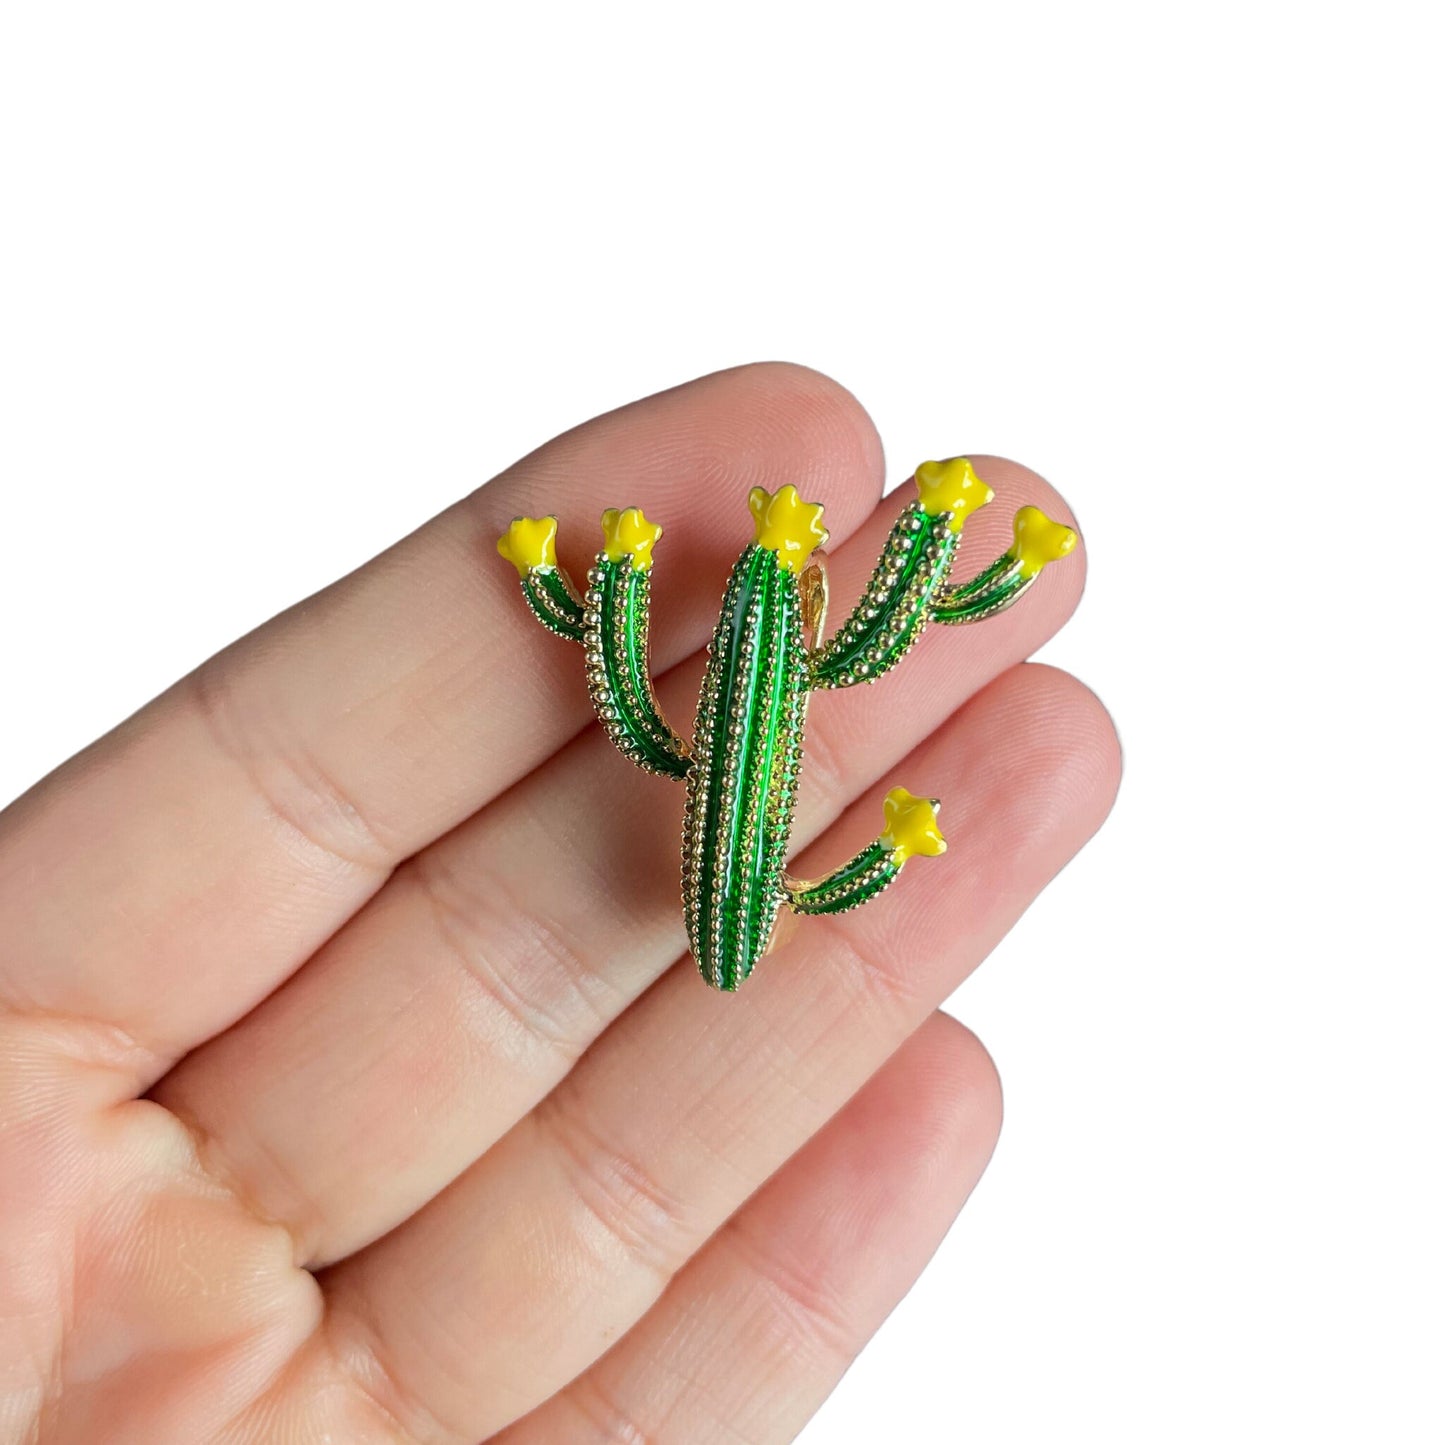 Cute Yellow Flower Cactus Plant Pin Brooch /Delicate Green Enamel Cactus Costume Brooch / Cactus Jewellery / Dainty Brooch / Gift For Her